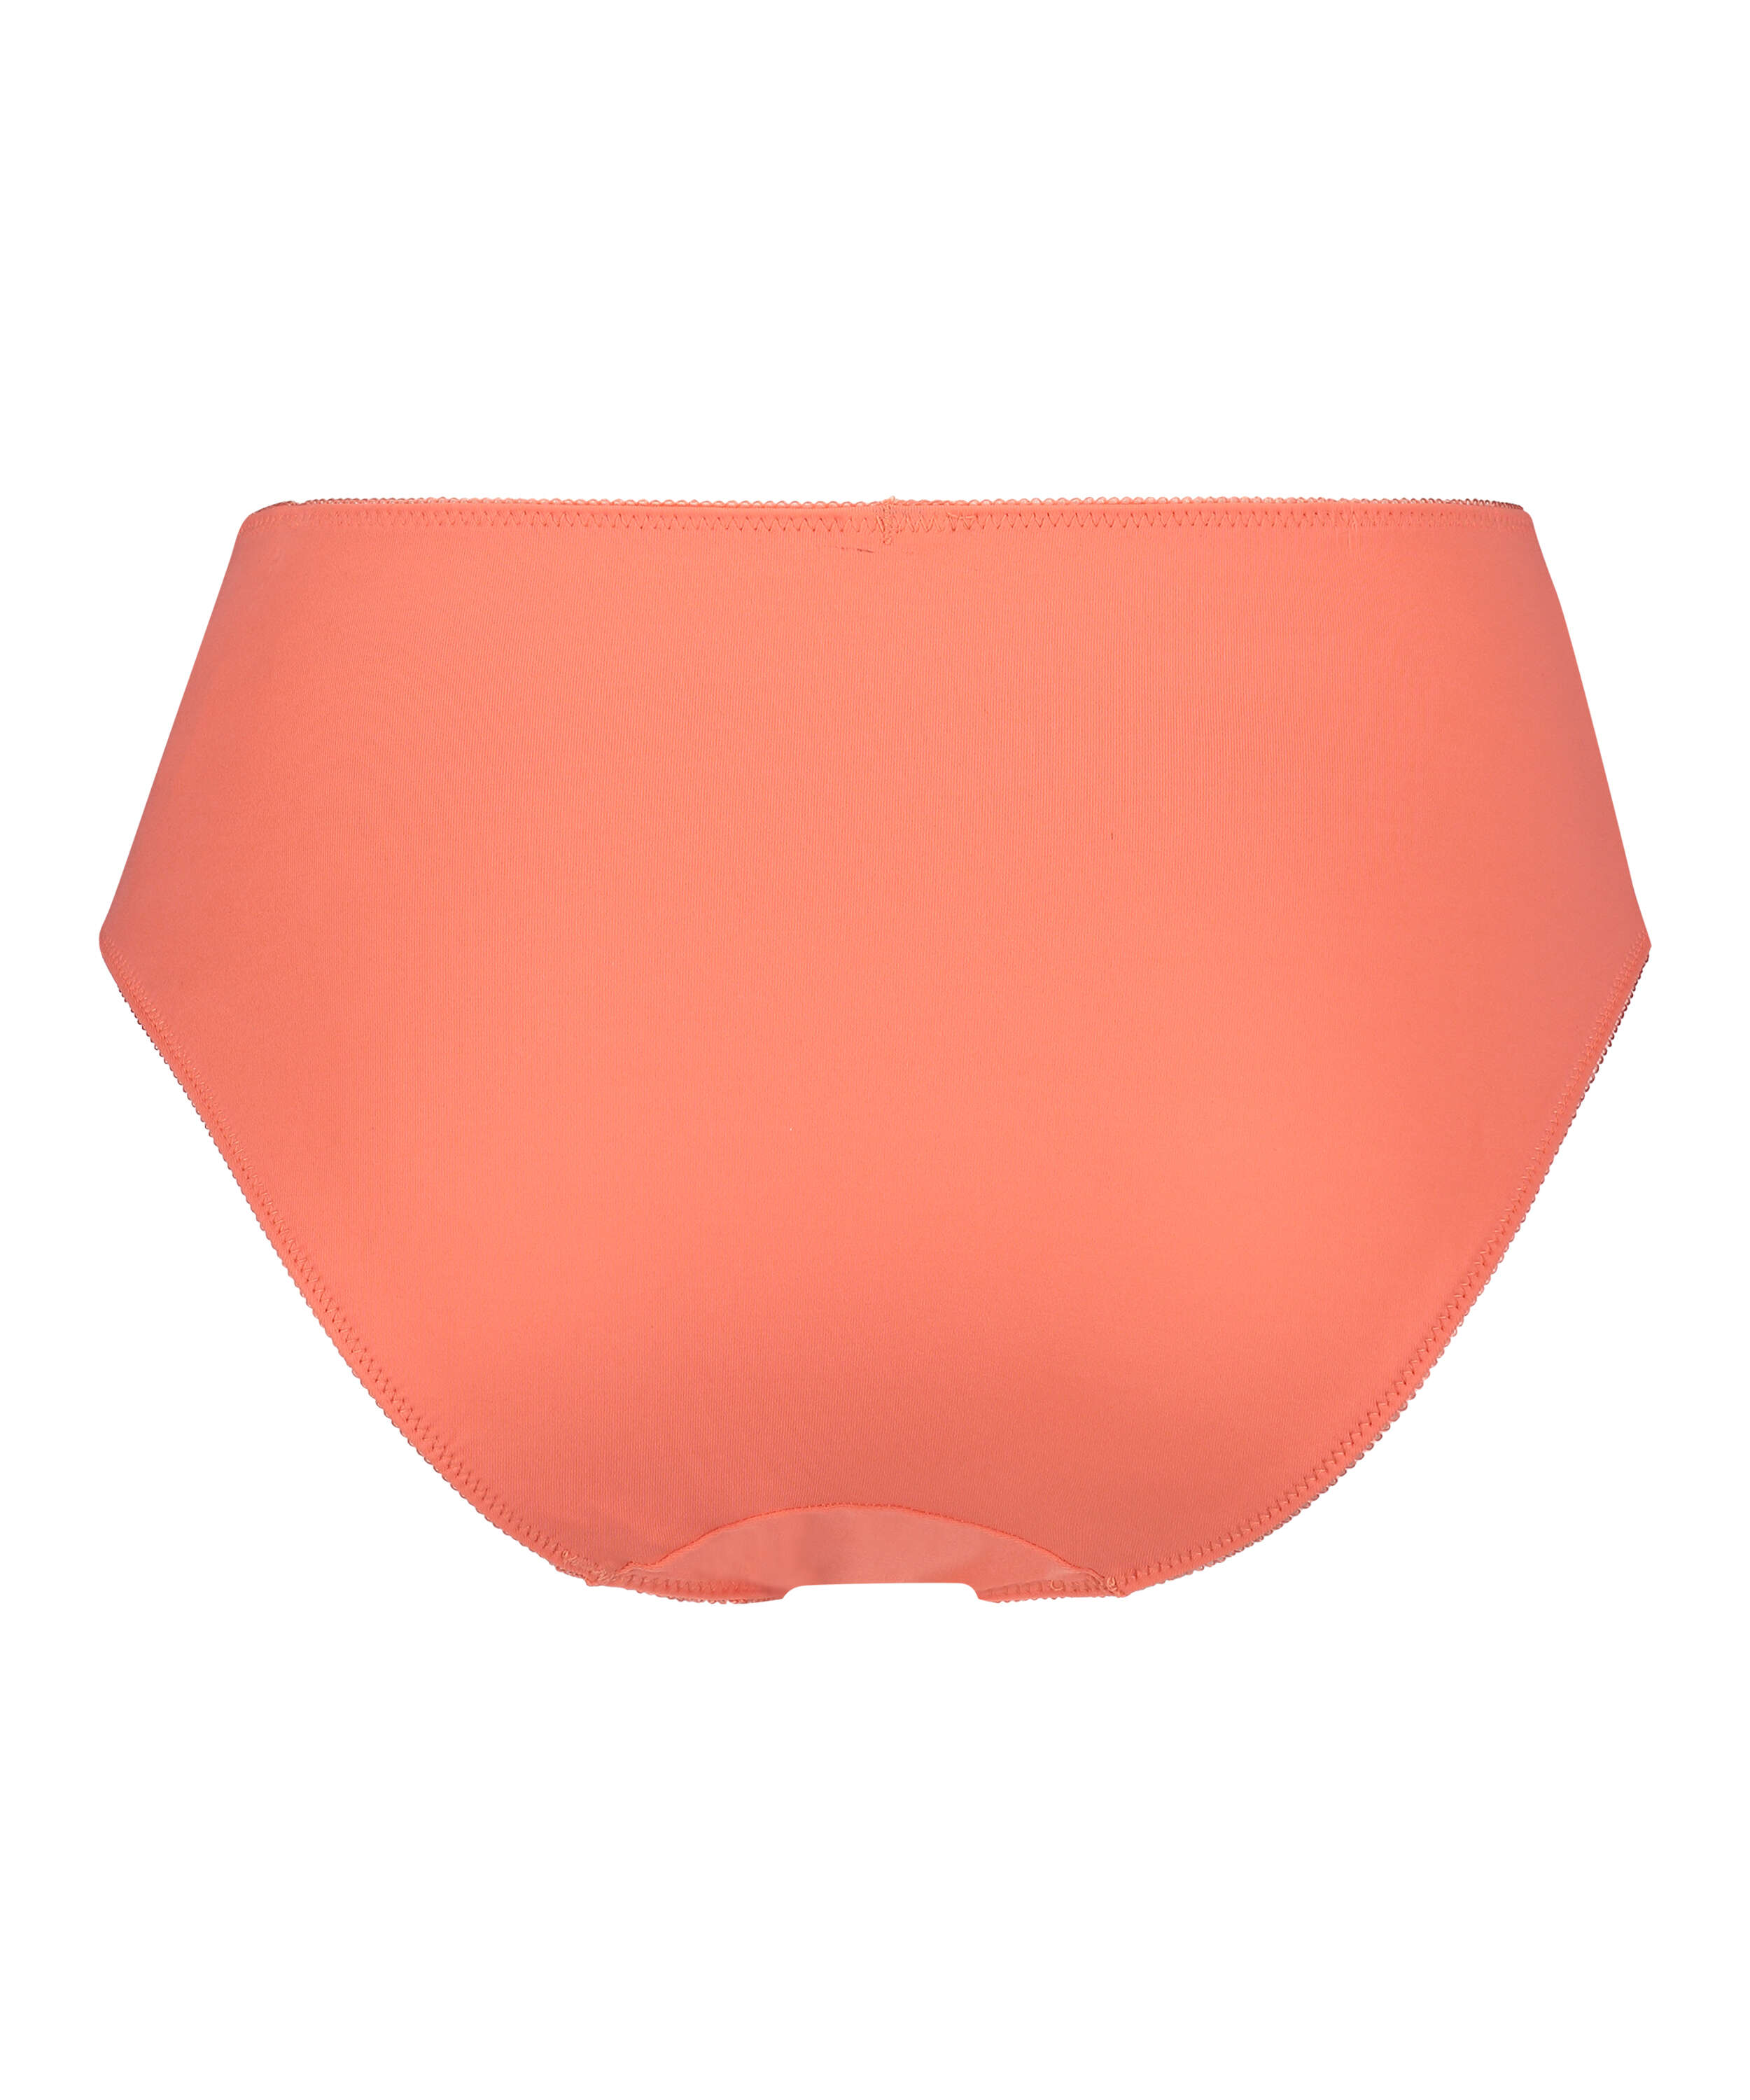 Diva high knickers, Pink, main